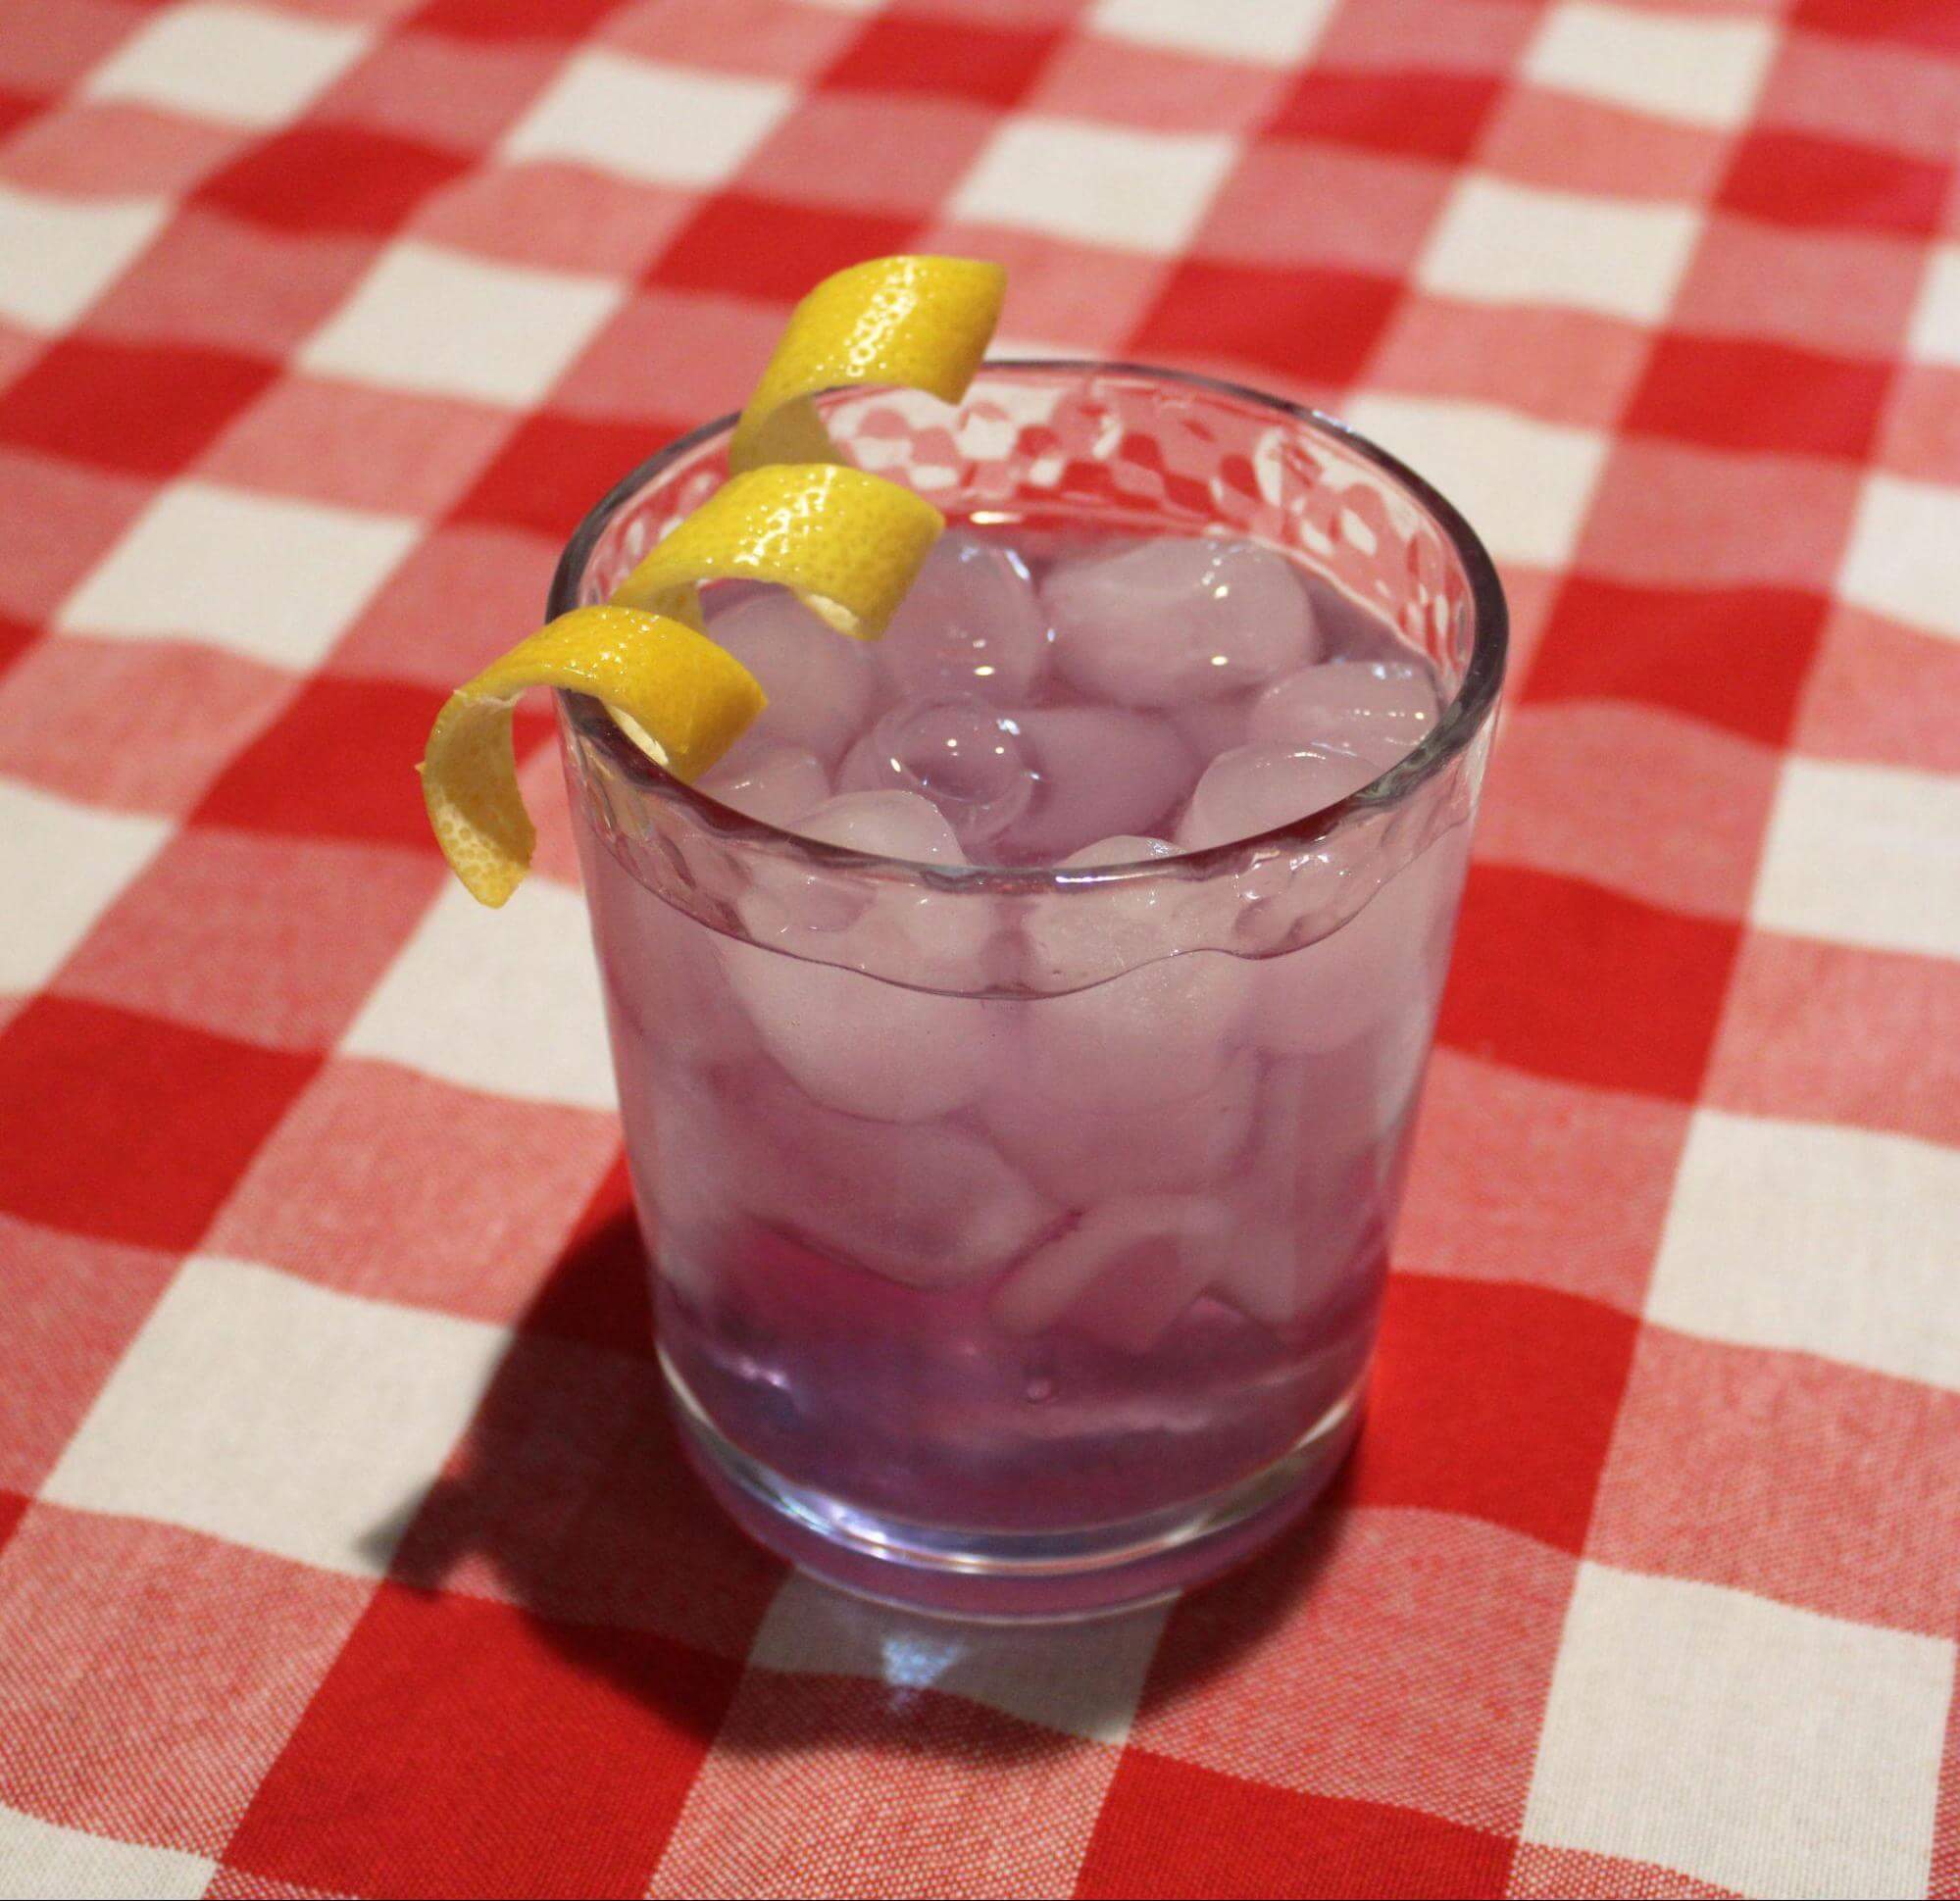 Glass of The Lavendar Menace sitting on red checkered picnic table cloth with lemon twist on the rim.